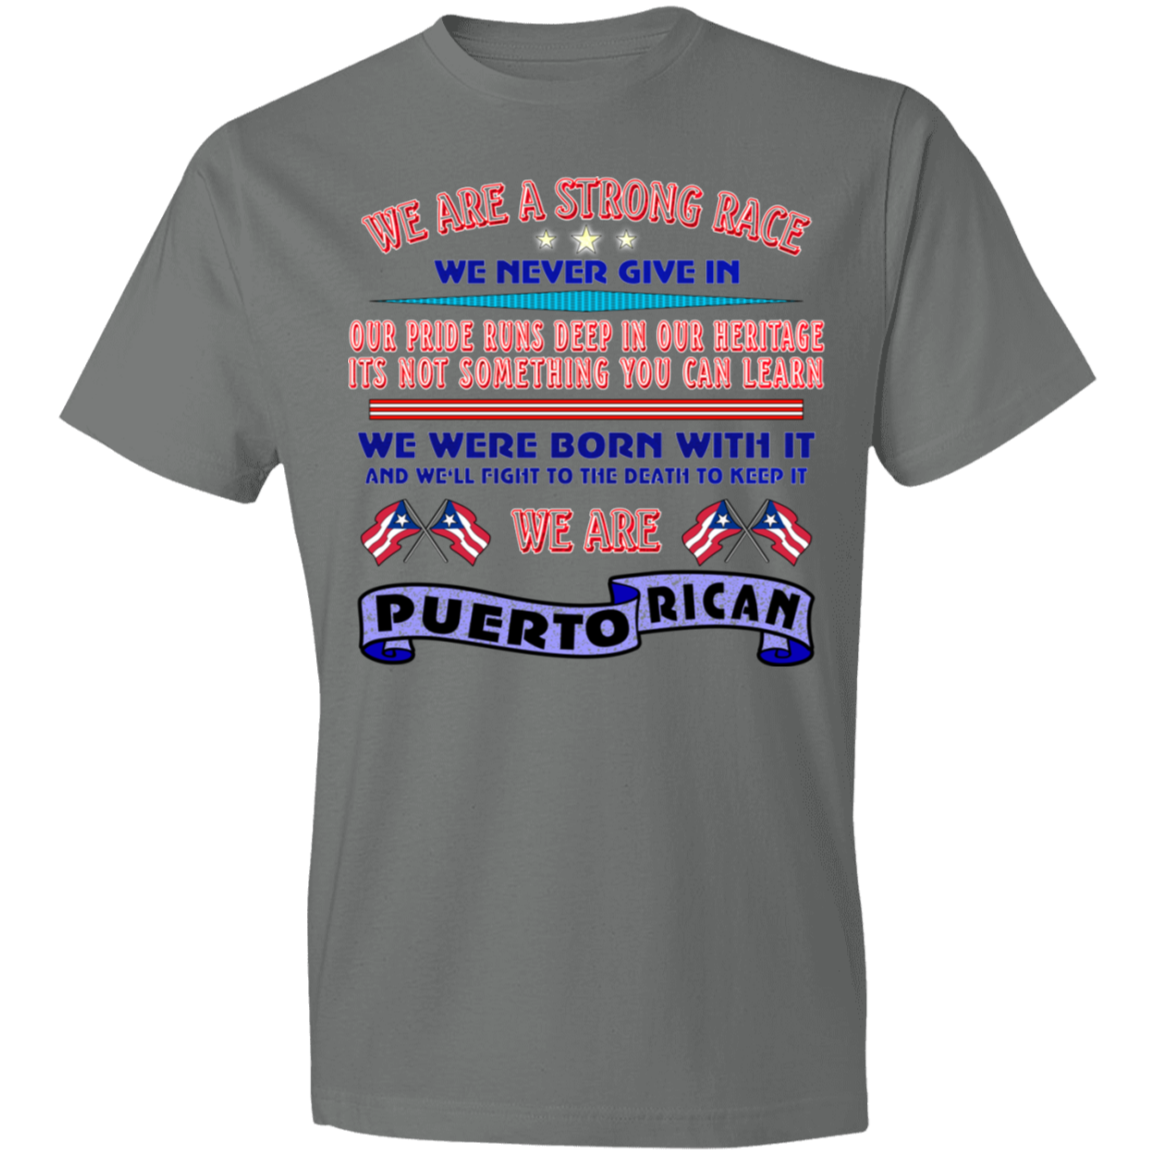 WE ARE Strong Lightweight T-Shirt 4.5 oz - Puerto Rican Pride